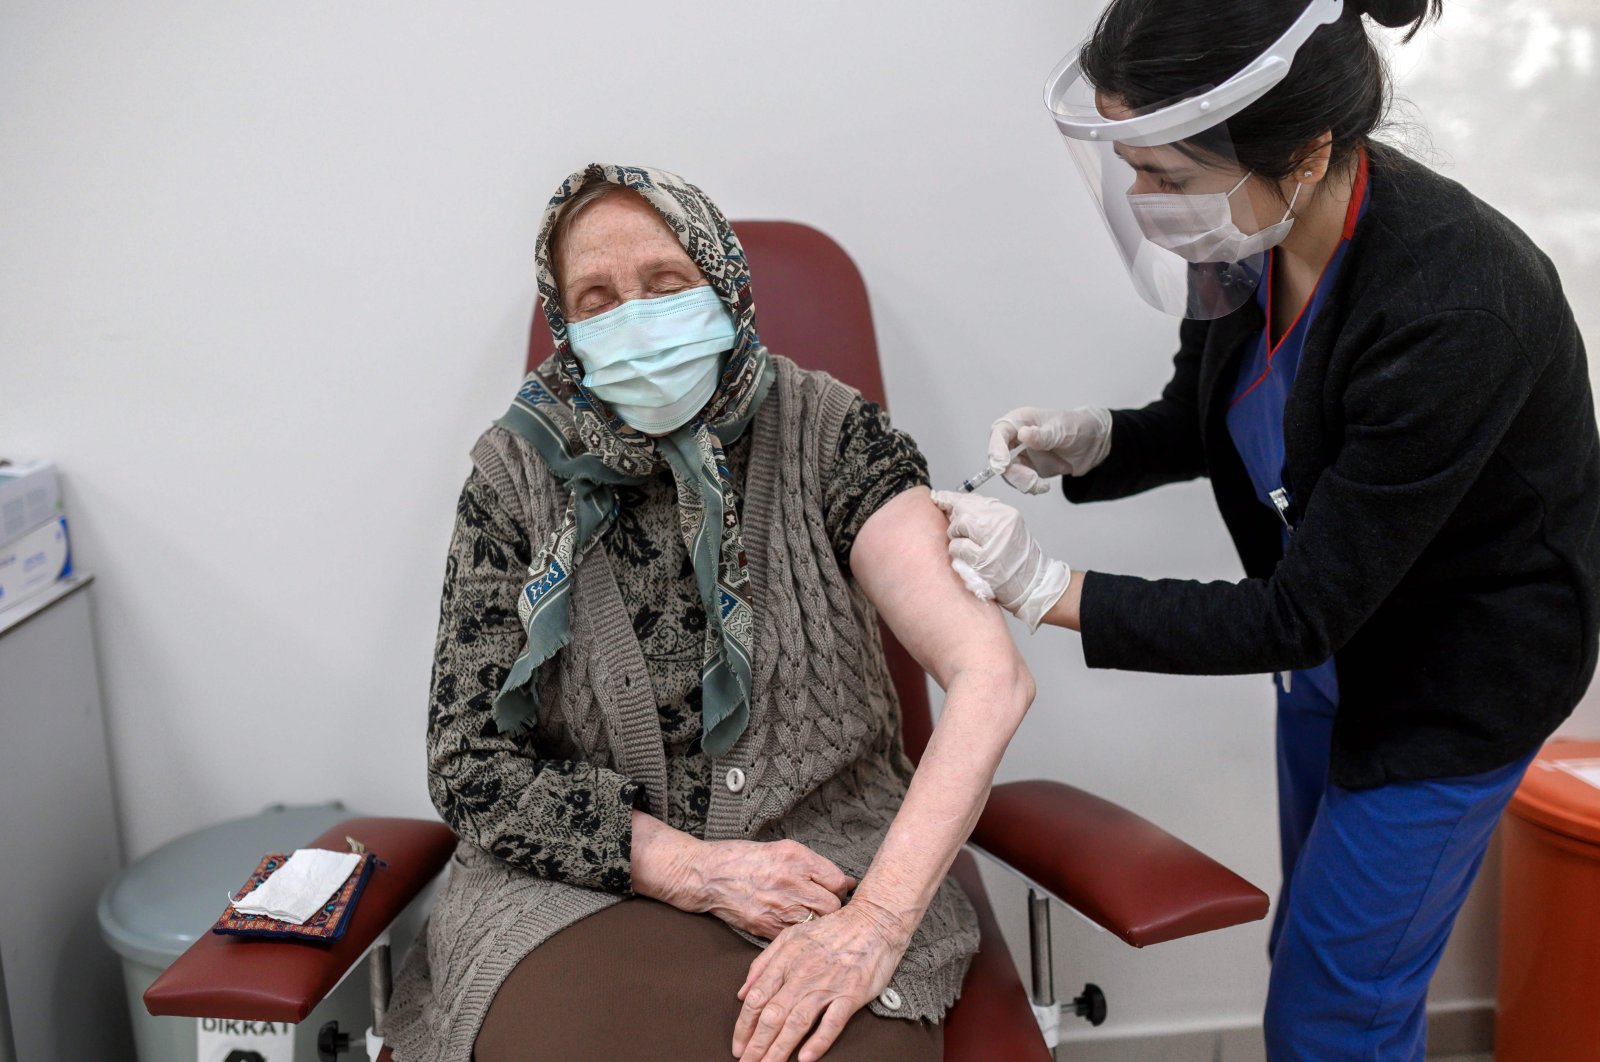 A woman receives an injection of the CoronaVac COVID-19 vaccine at a hospital in Istanbul, Turkey, Jan. 28, 2021 (AFP Photo)